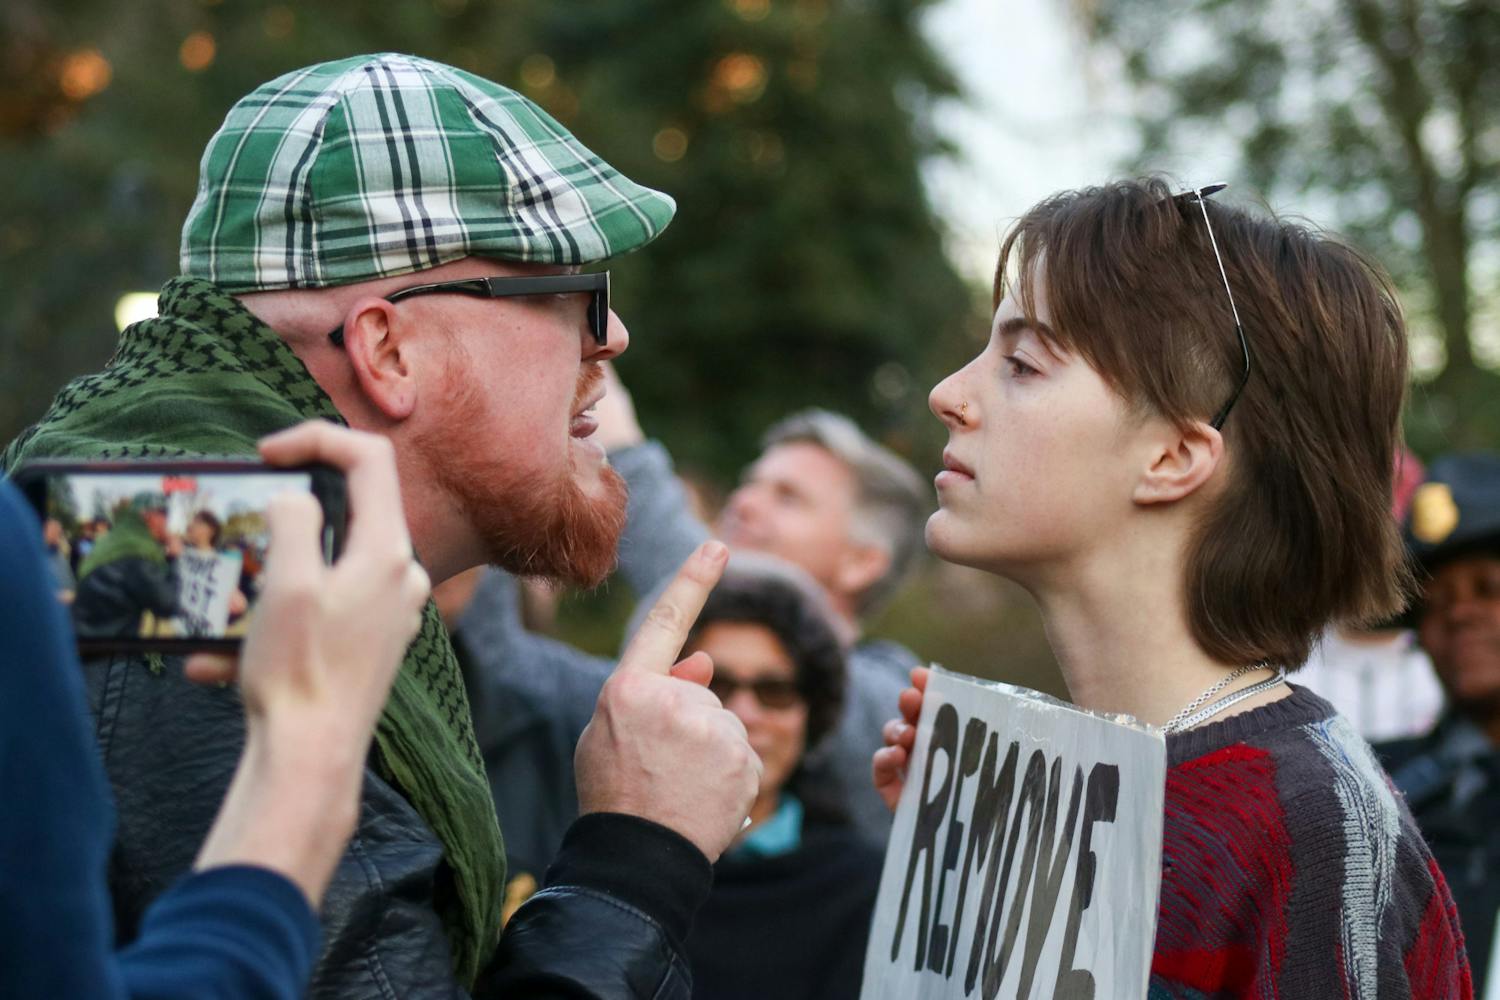 Attendee JT Bessinger (left) and protestor and third-year media arts student Katelynn Basile (right) engage in a verbal altercation with each other at the Statehouse on Jan. 28, 2023. A crowd gathered outside of the Statehouse on Saturday as former President Donald Trump spoke inside to invitees and members of the media.